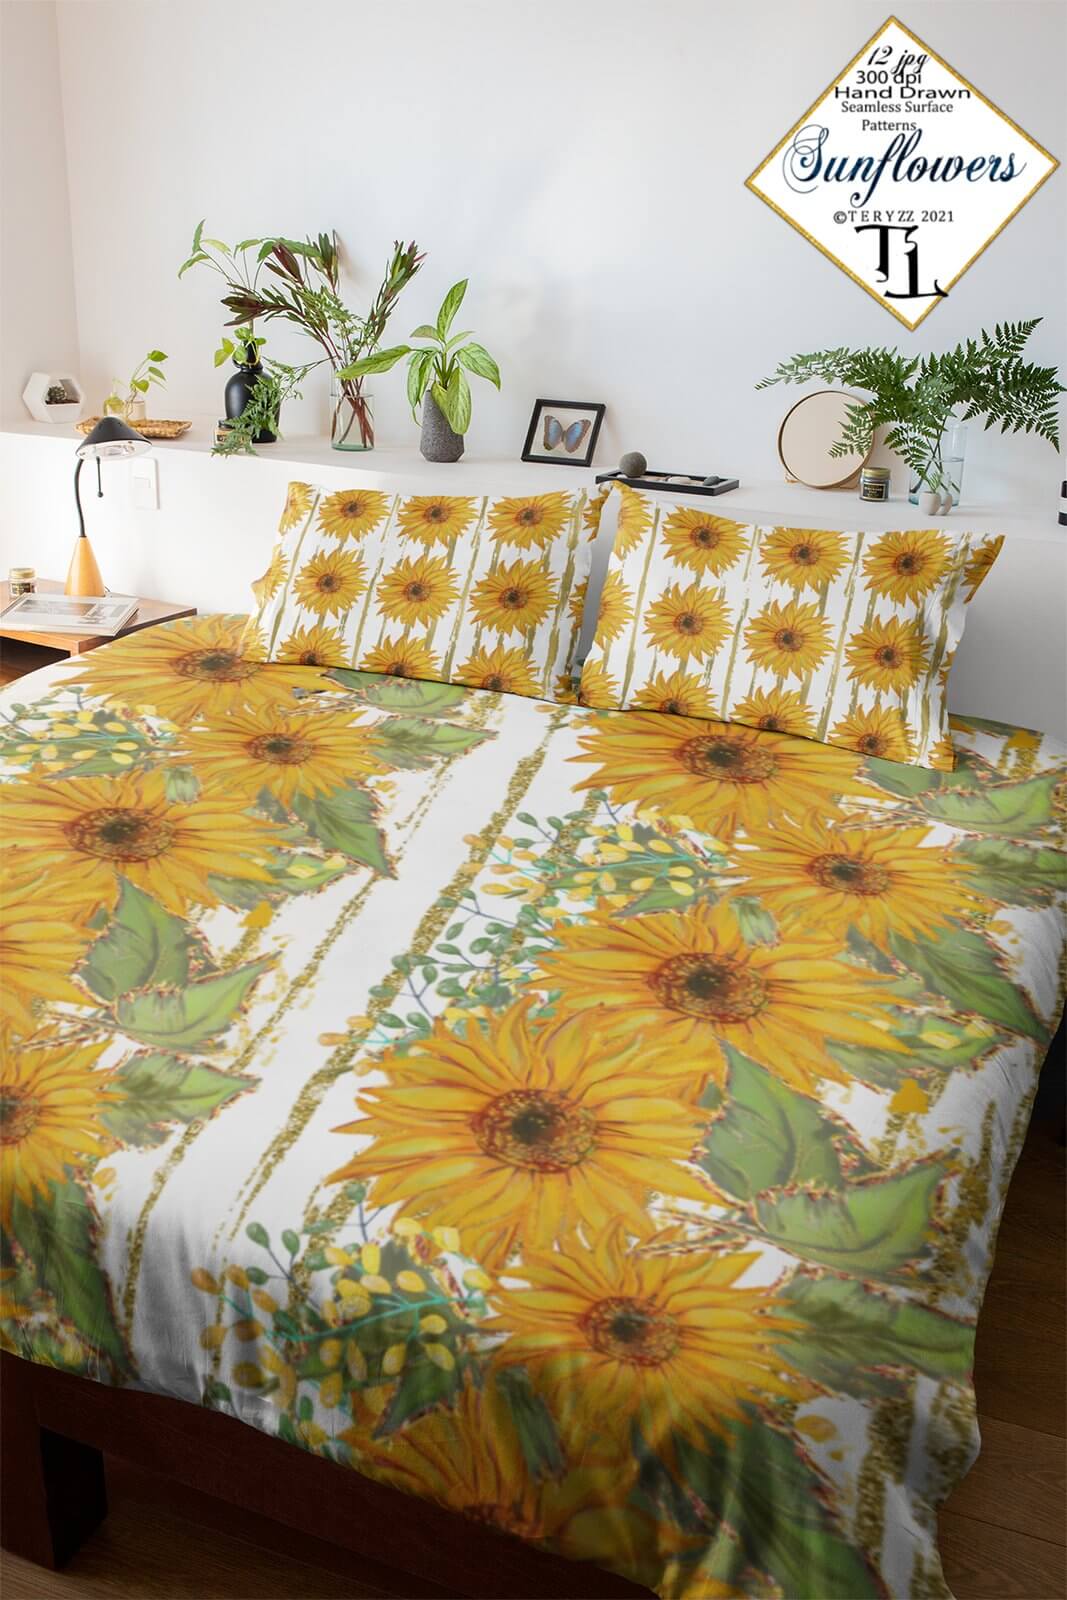 Bedding sets with seamless patterns with sunflowers on beige tones.